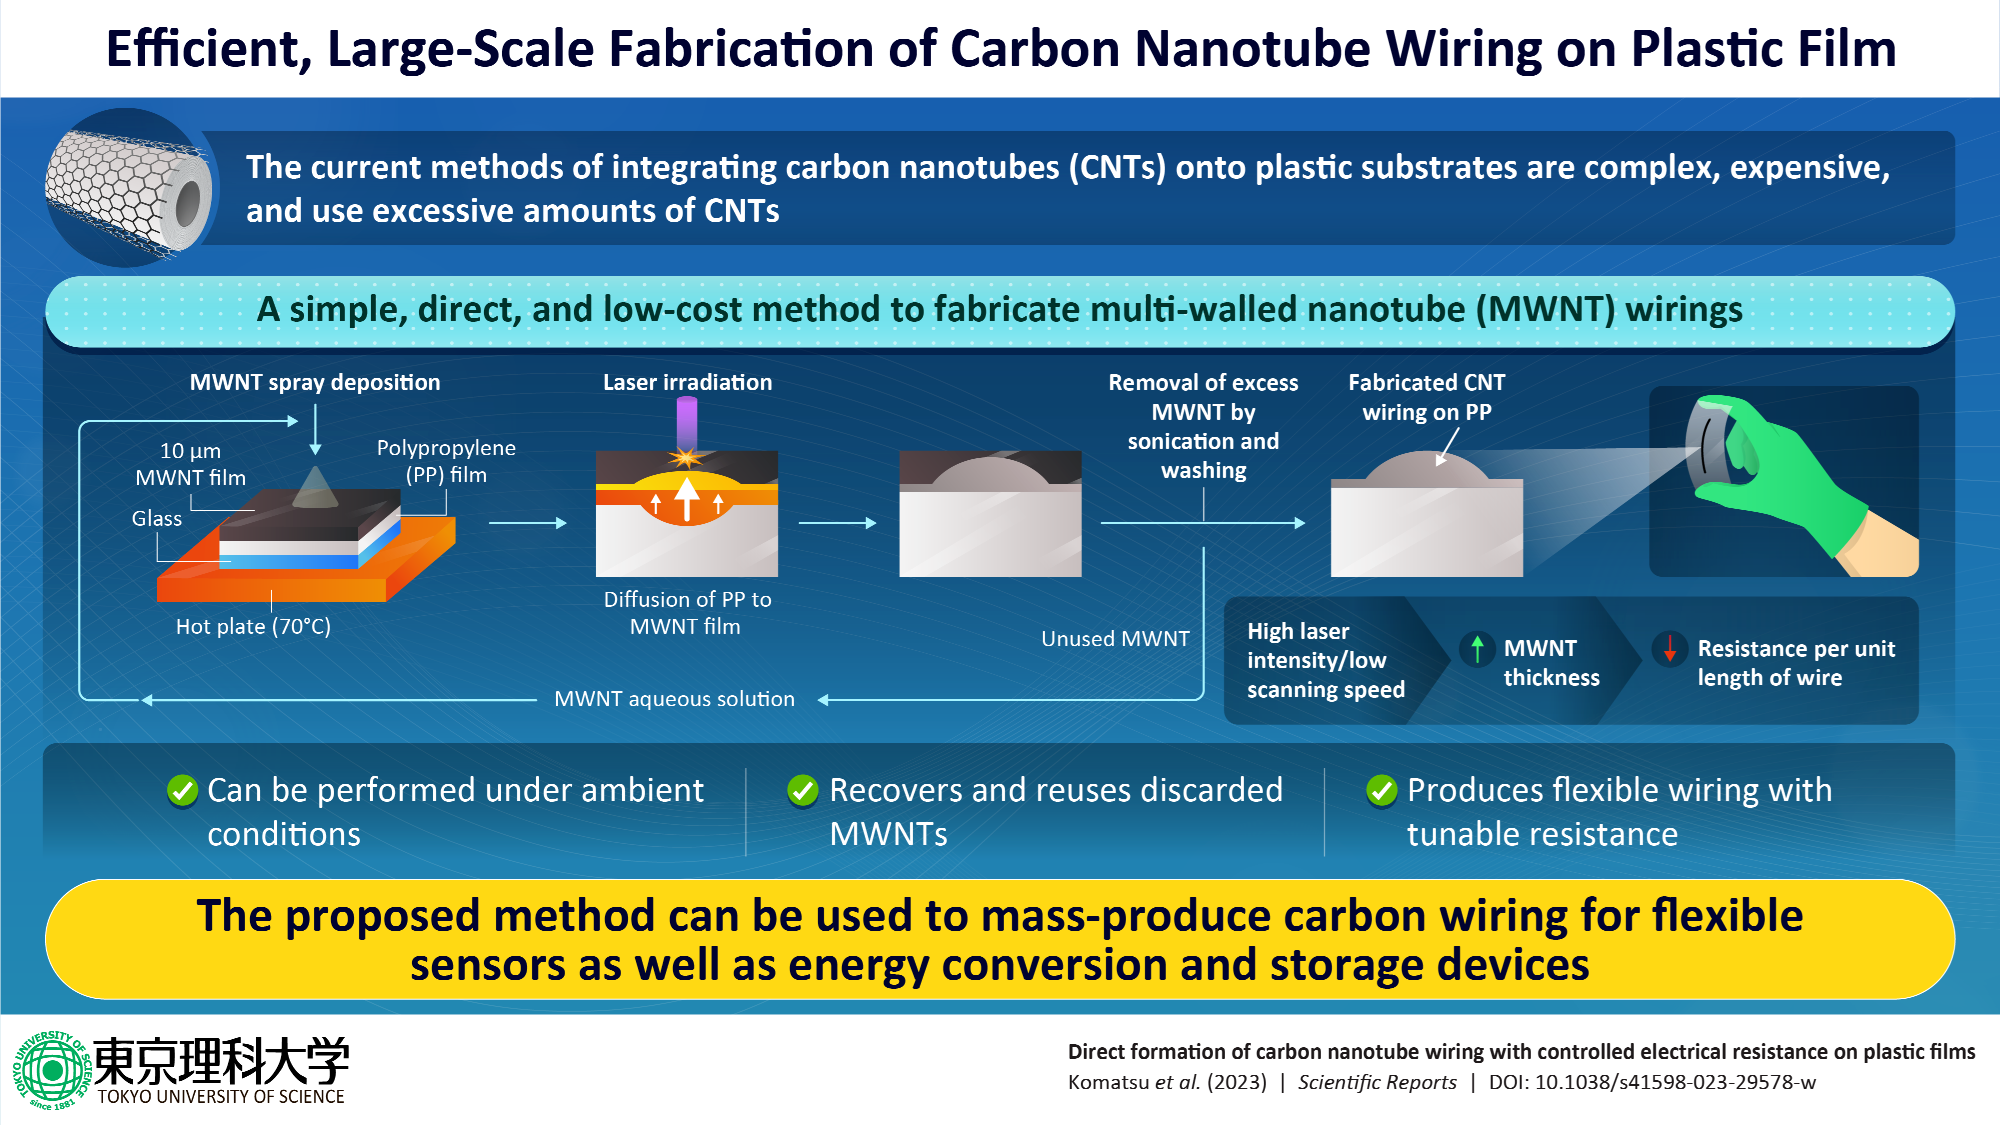 Affordable Production of Carbon Nanotubes on Plastic